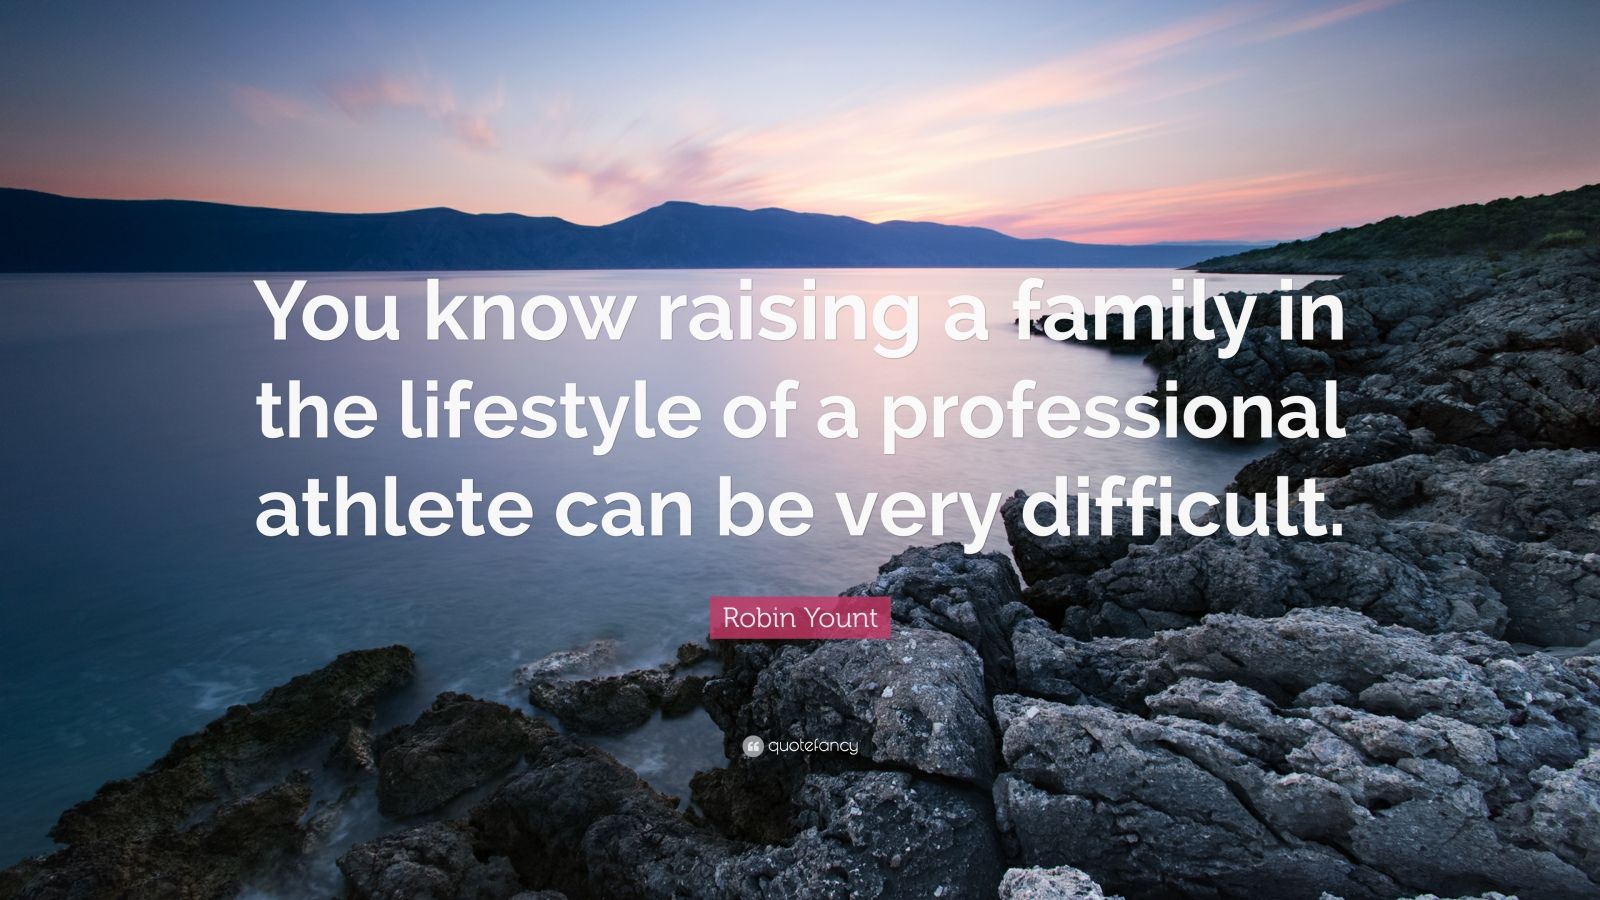 Robin Yount Quote: “You know raising a family in the lifestyle of